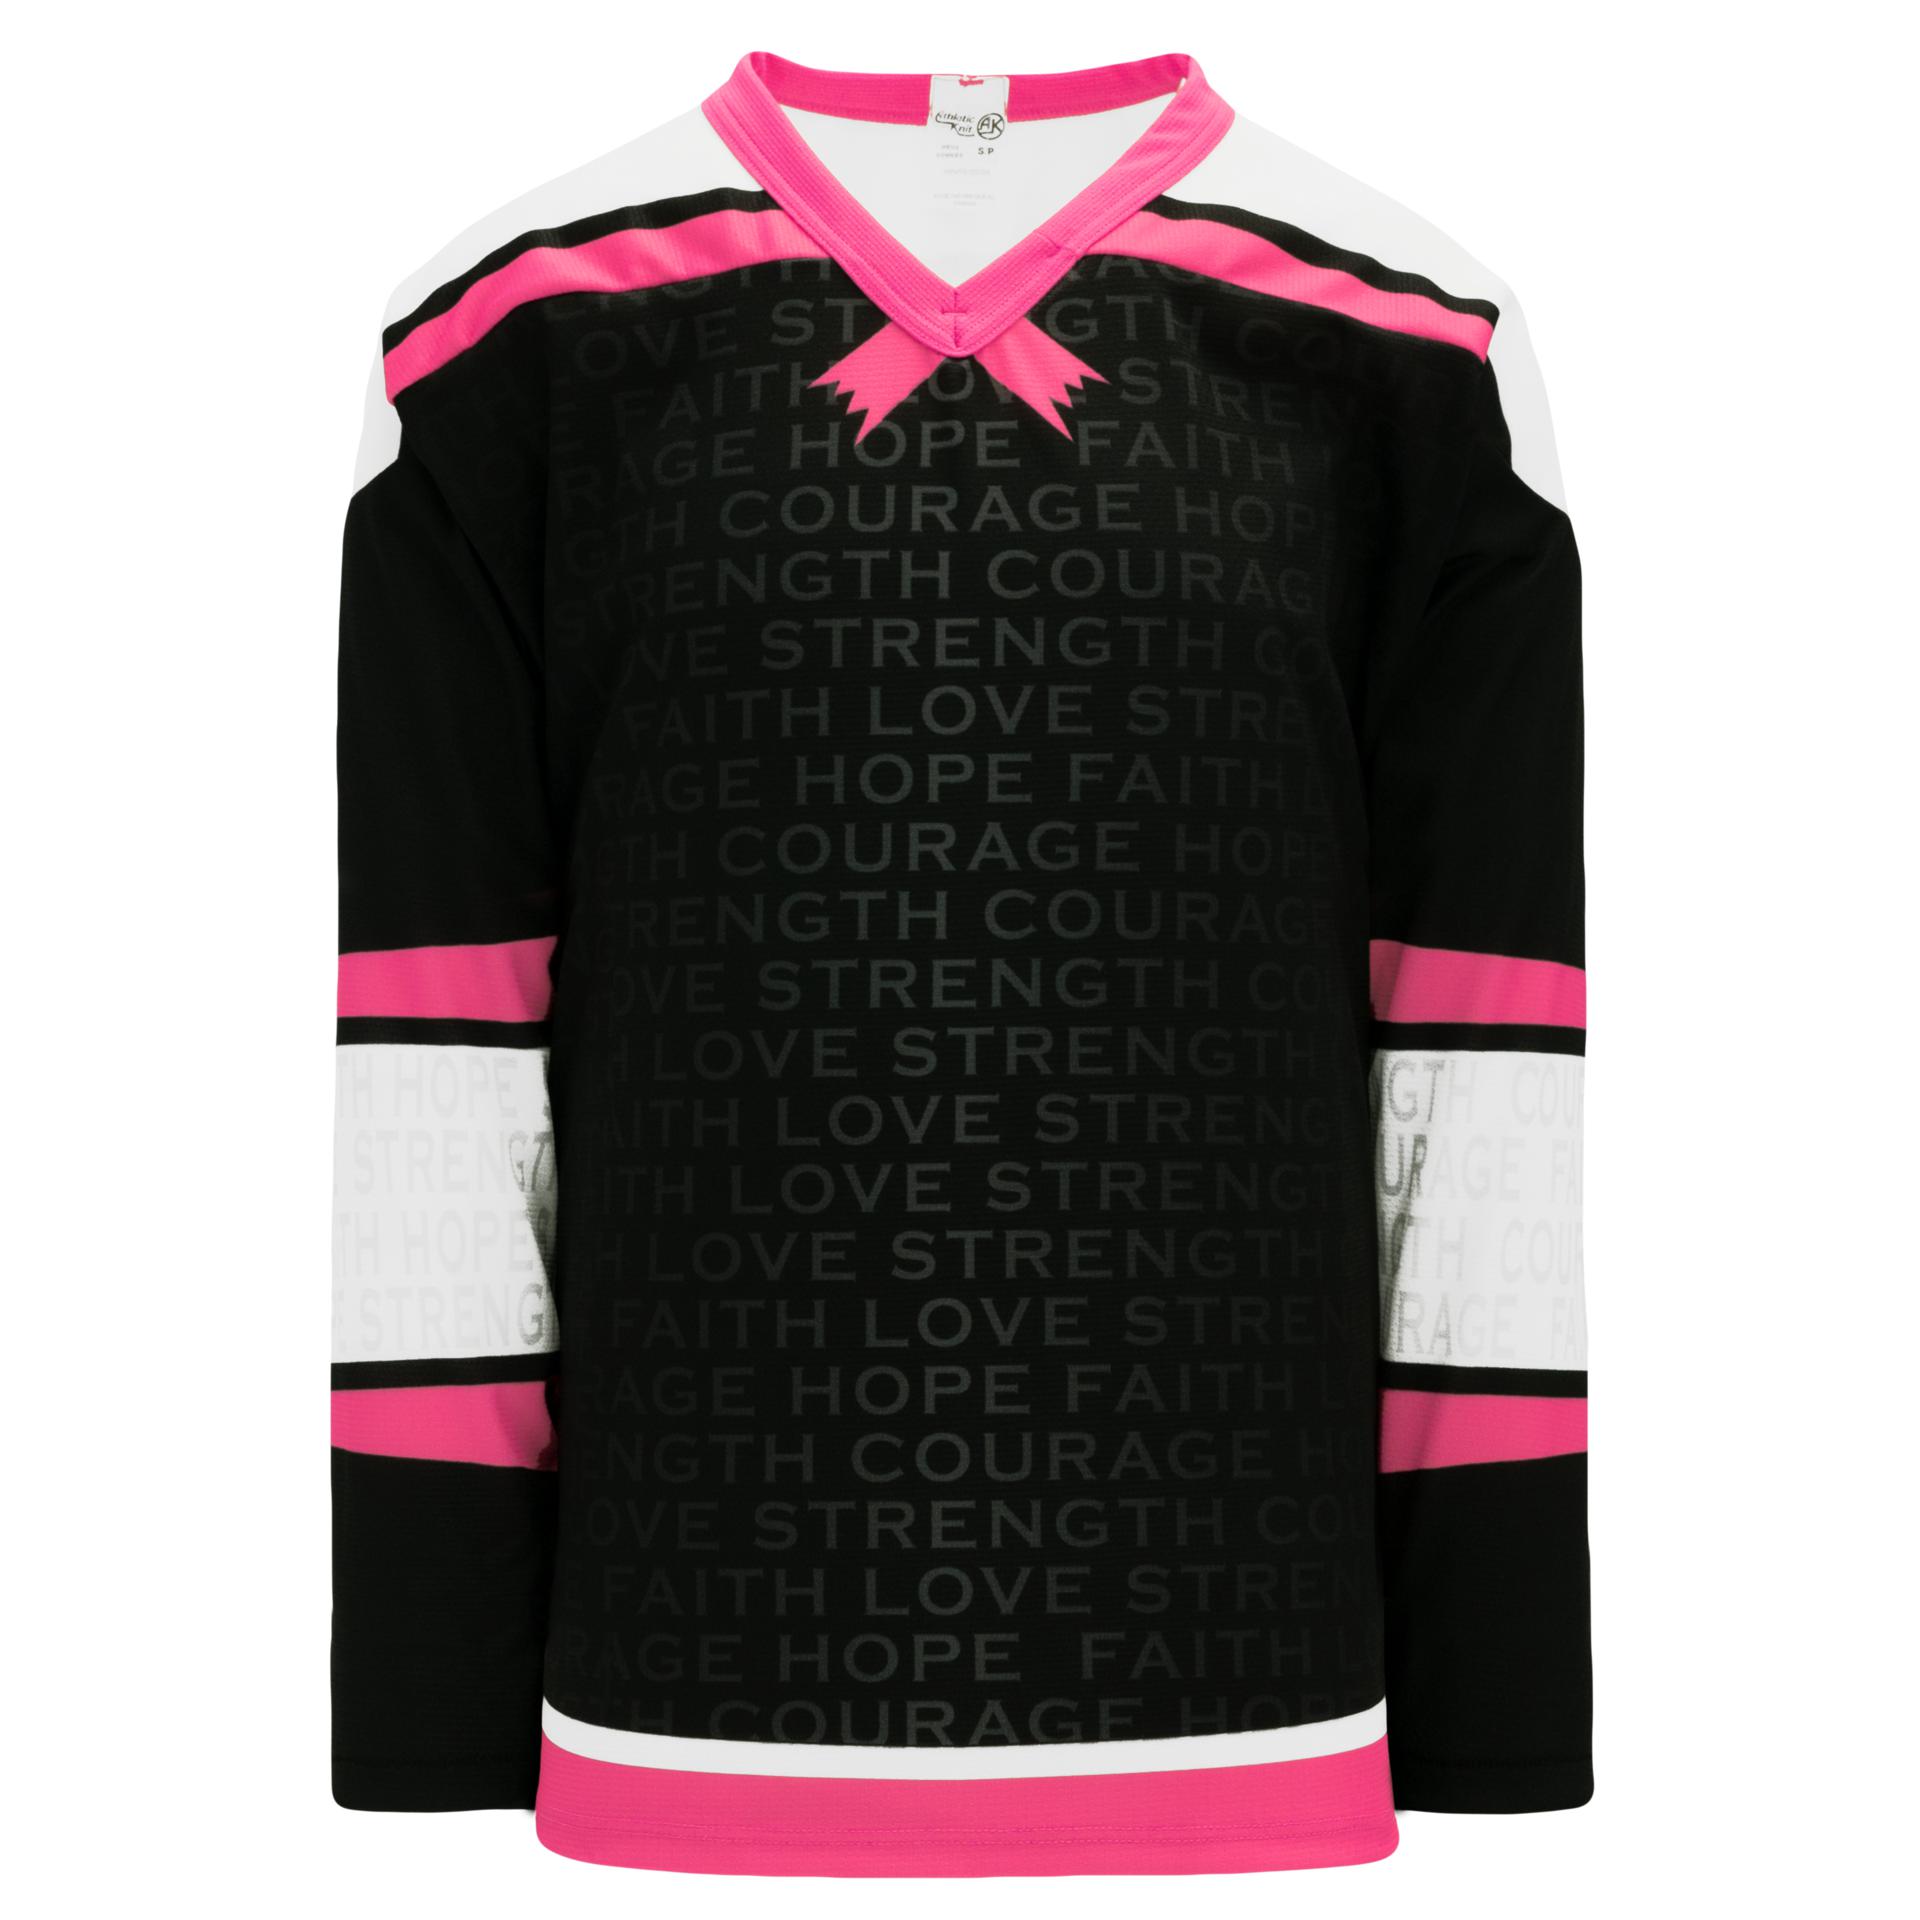 Breast Cancer Awareness Butterfly White Charity Hockey Jersey